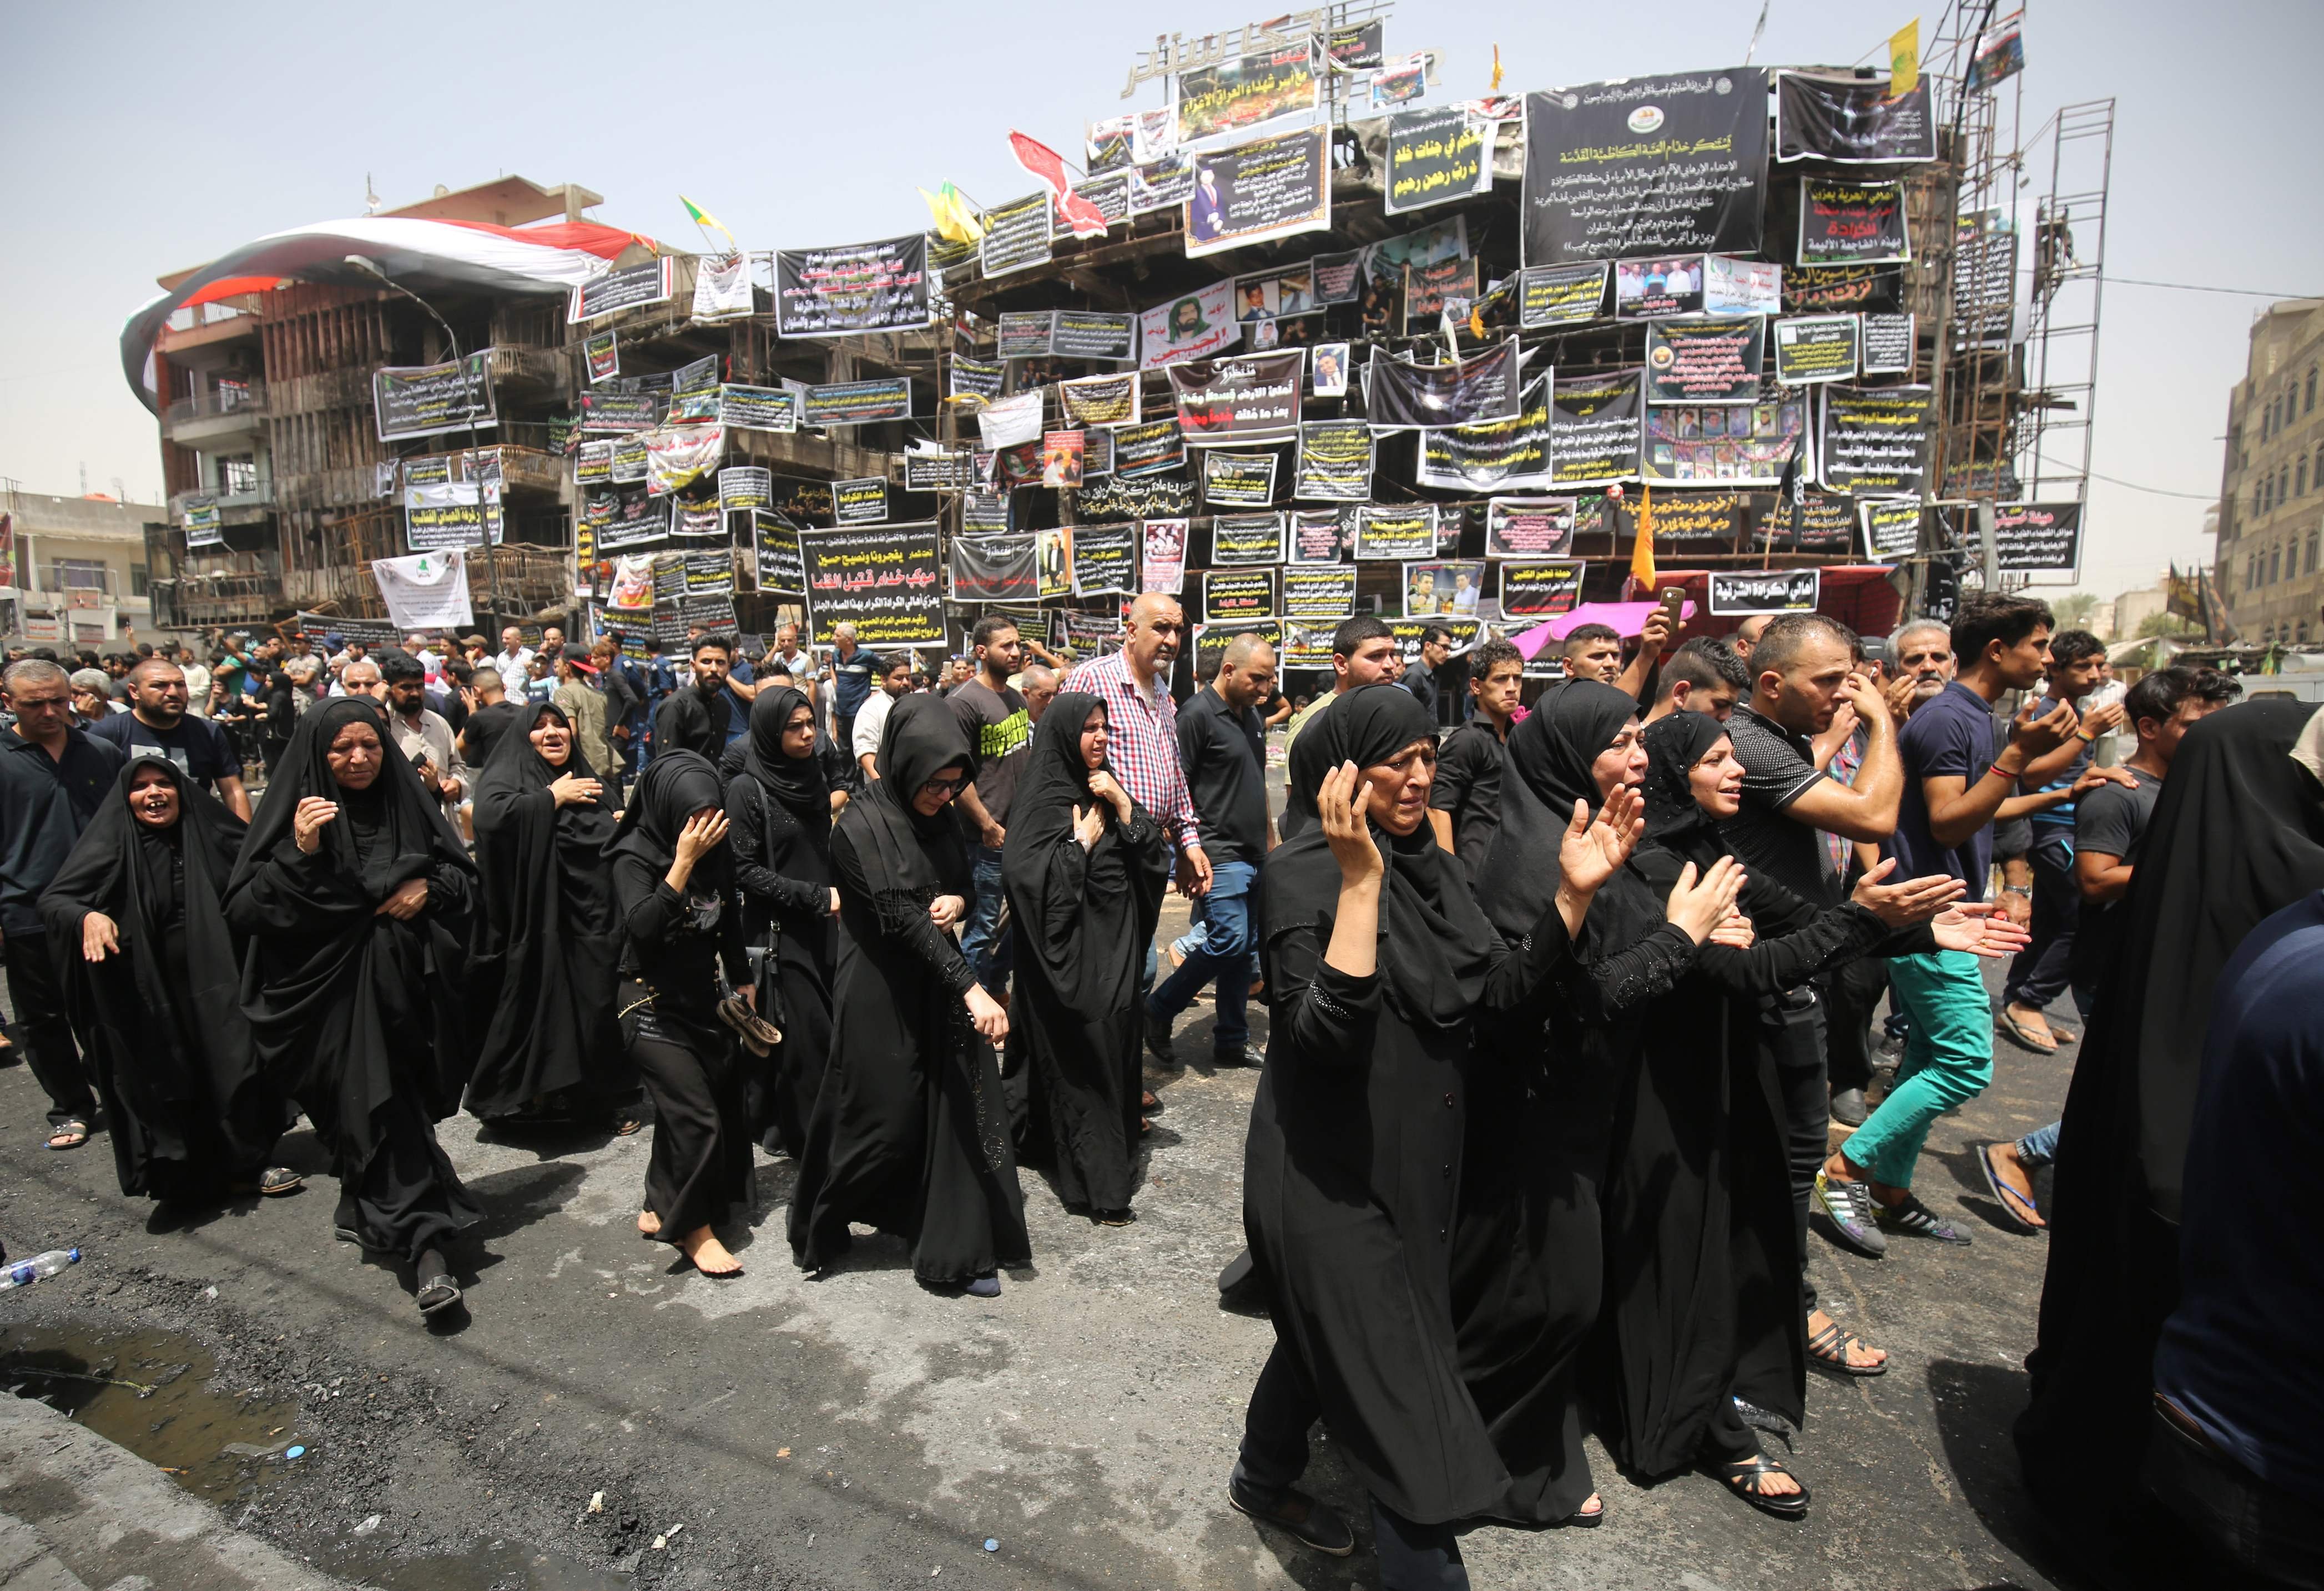 Mourners walk during the funeral of an Iraqi man who was killed in a suicide bombing attack in Baghdad, on July 6, 2016. (Ahmad al-Rubaye&mdash;AFP/Getty Images)